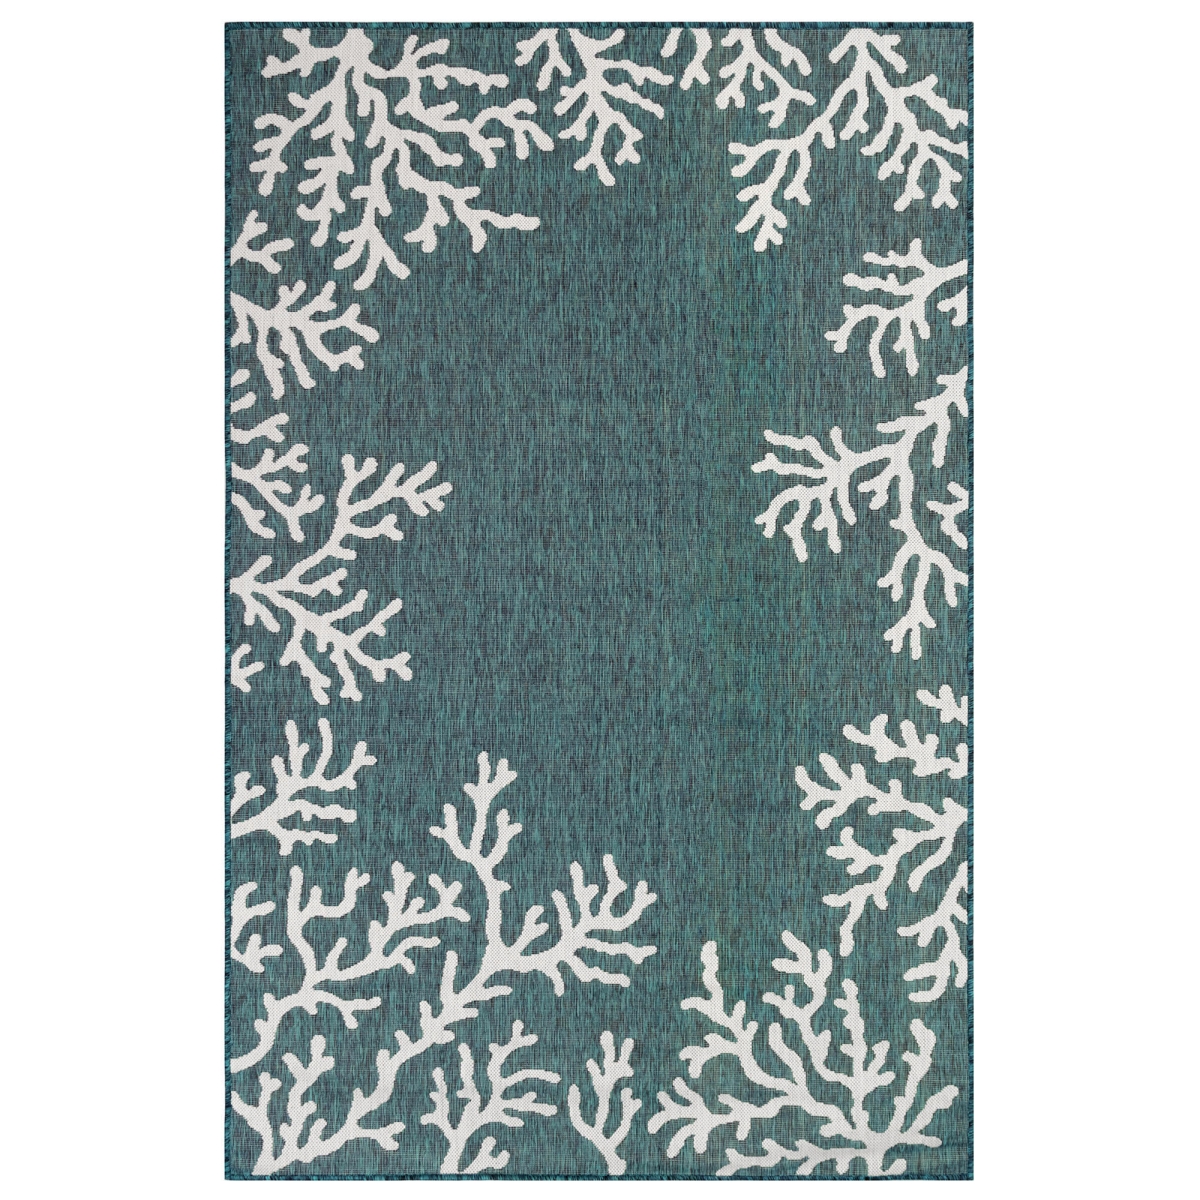 Cre69844894 Liora Manne Carmel Coral Border Indoor & Outdoor Rug, Teal - 6 Ft. 6 In. X 9 Ft. 4 In.